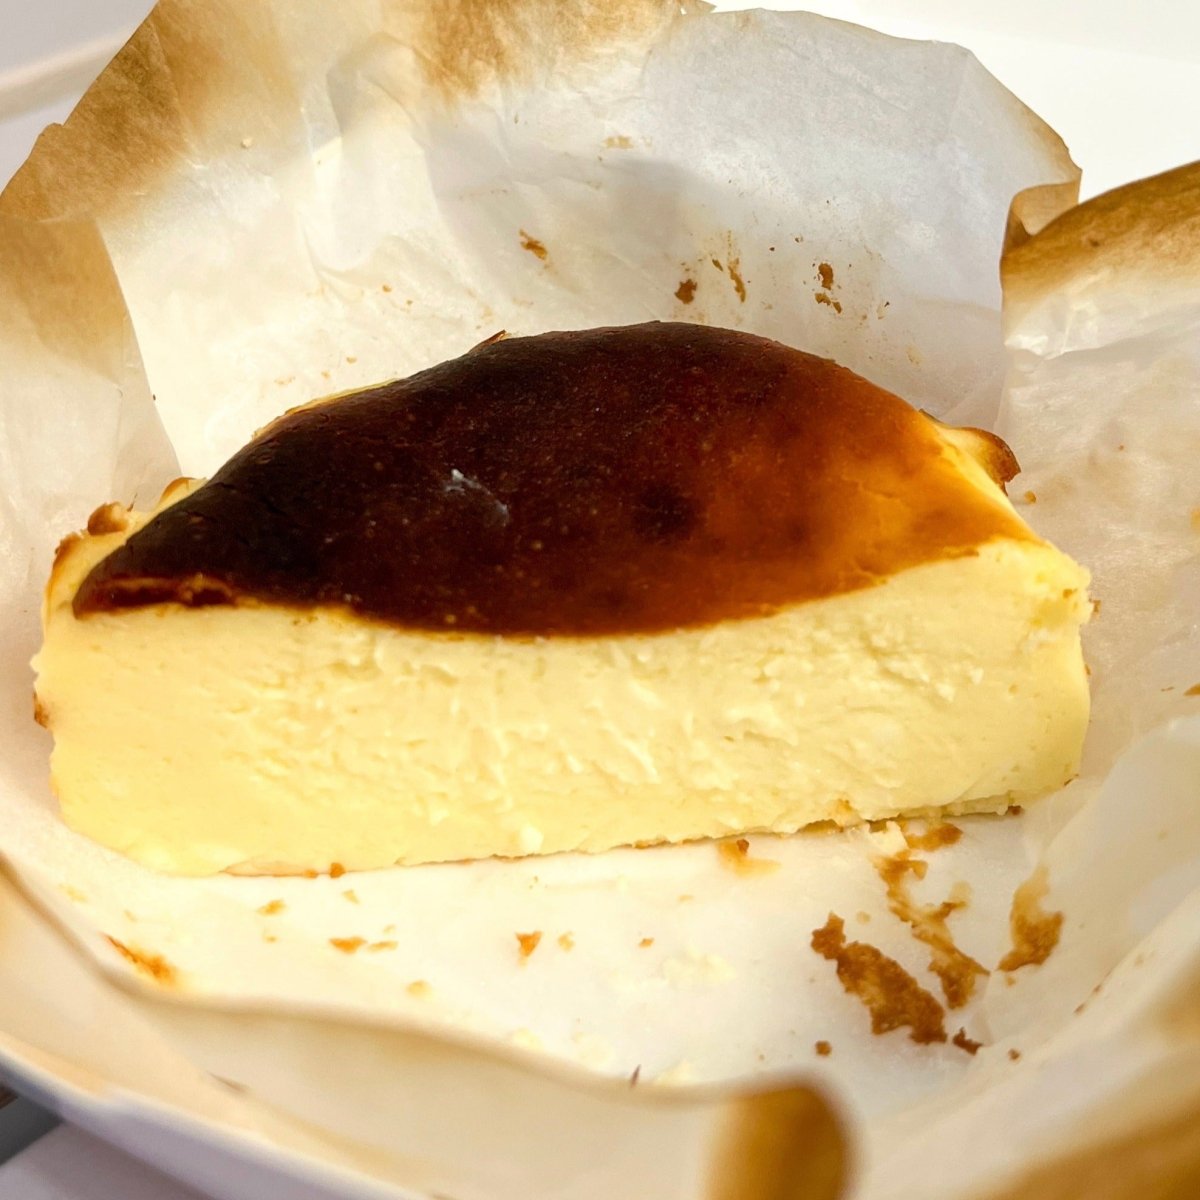 Melty burnt basque cheesecake in Toronto. Dessert that you can never have enough.